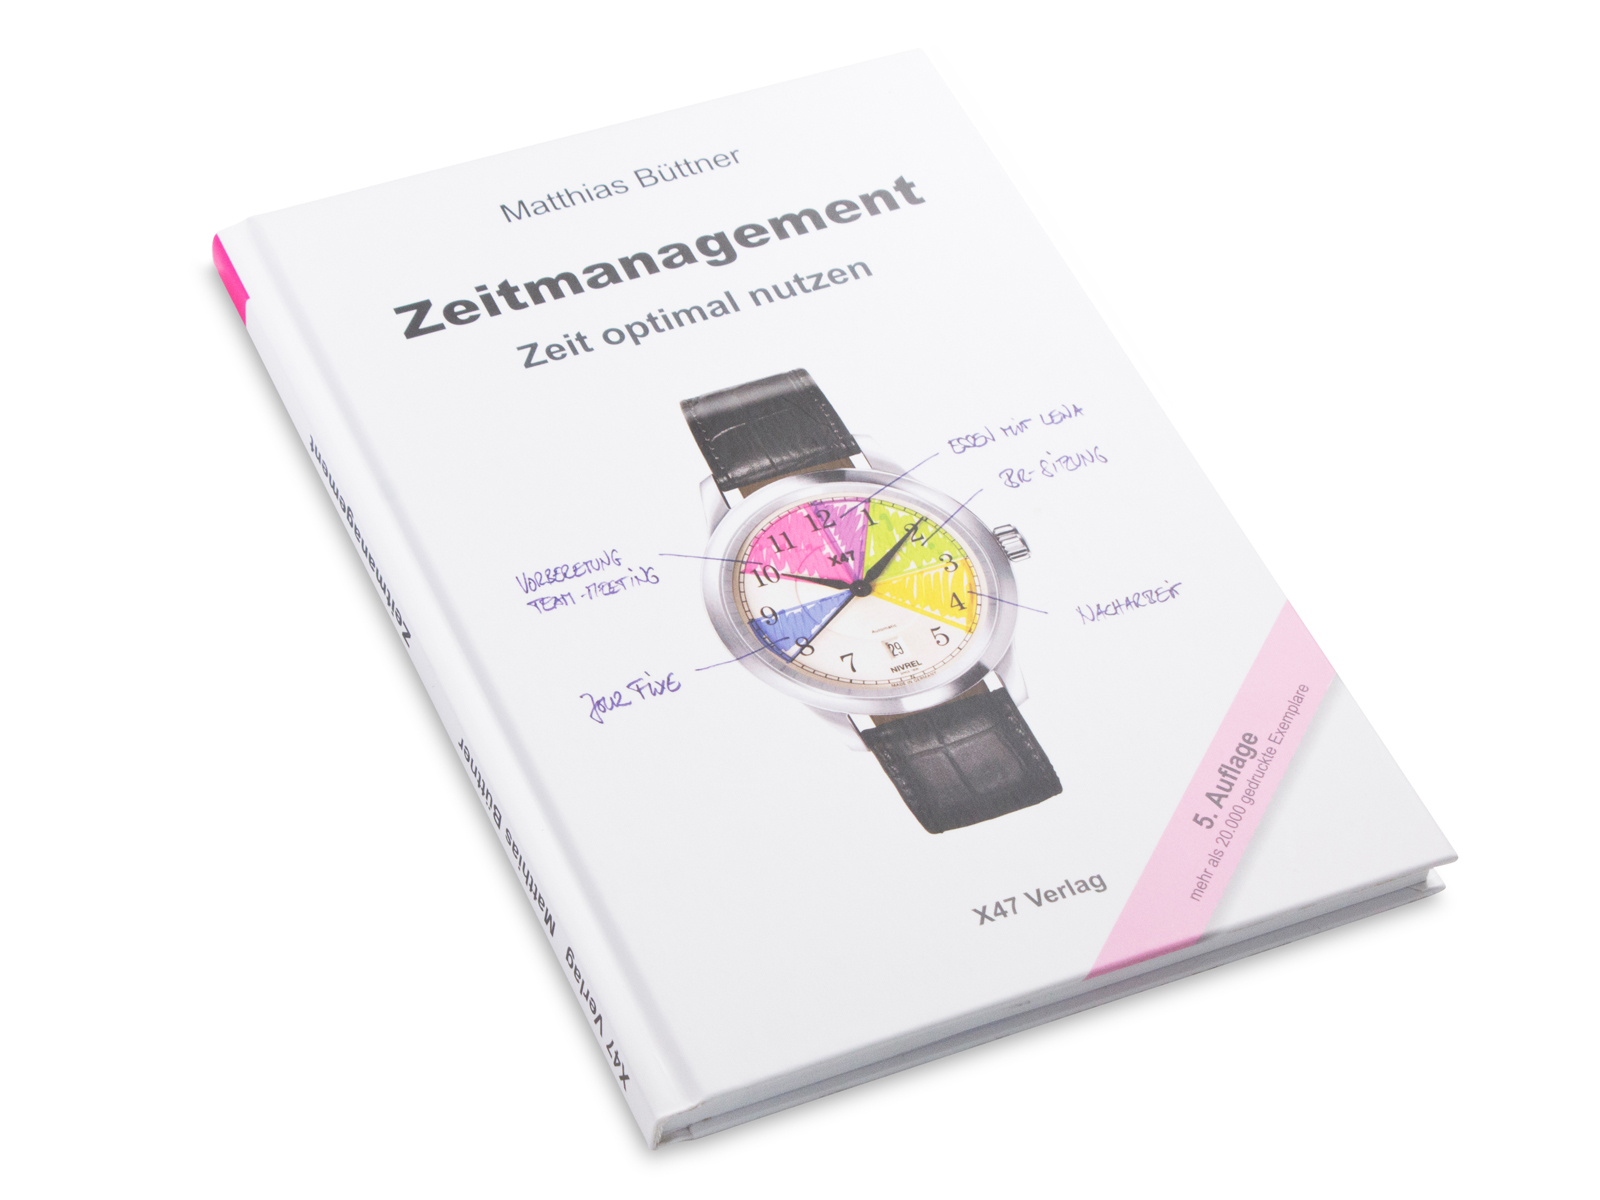 "Zeitmanagement" (only available in German)